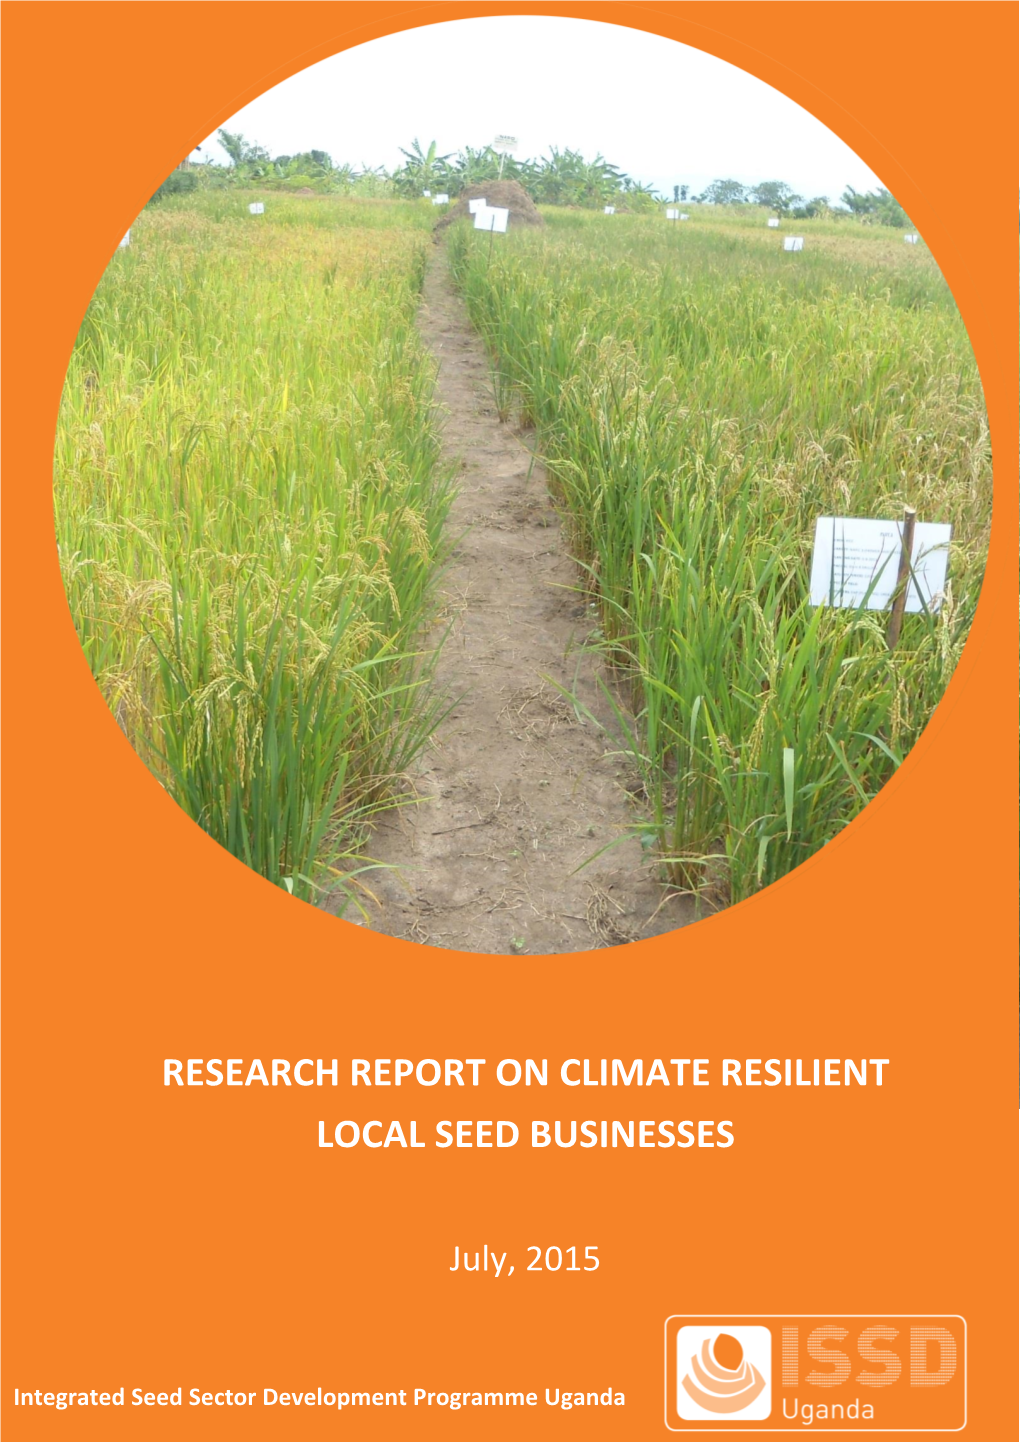 Research Report on Climate Resilient Local Seed Businesses